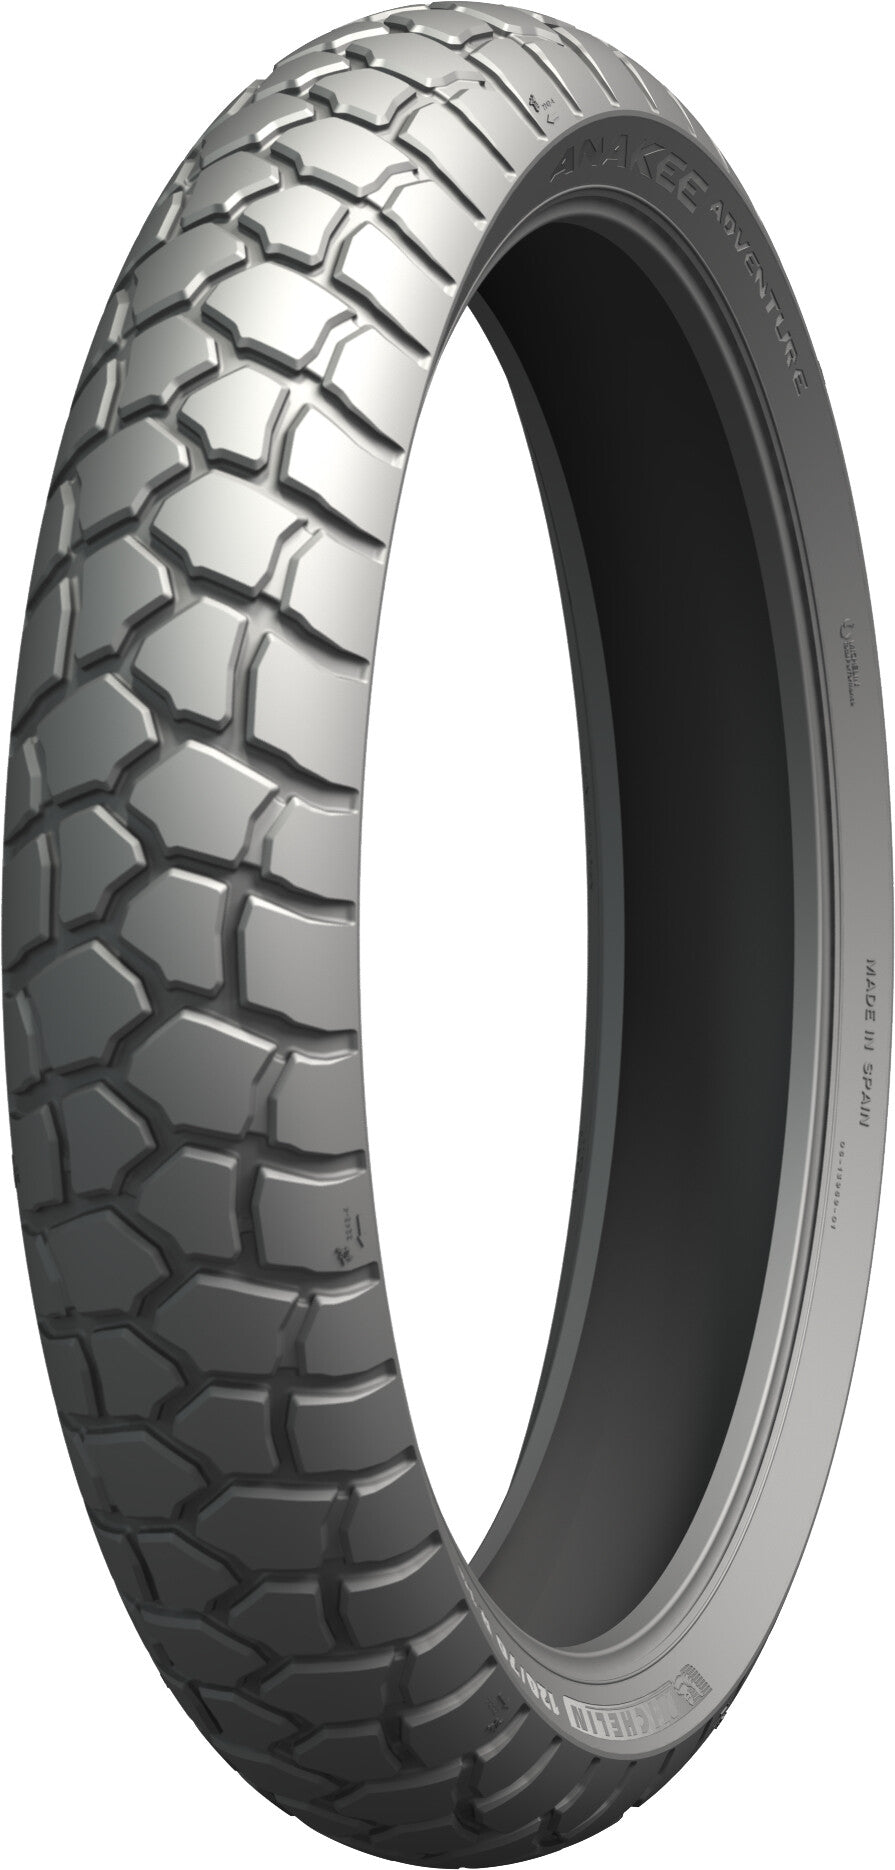 MICHELINTire Anakee Adventure Front 120/70 R 17 58v Tl/Tt15806